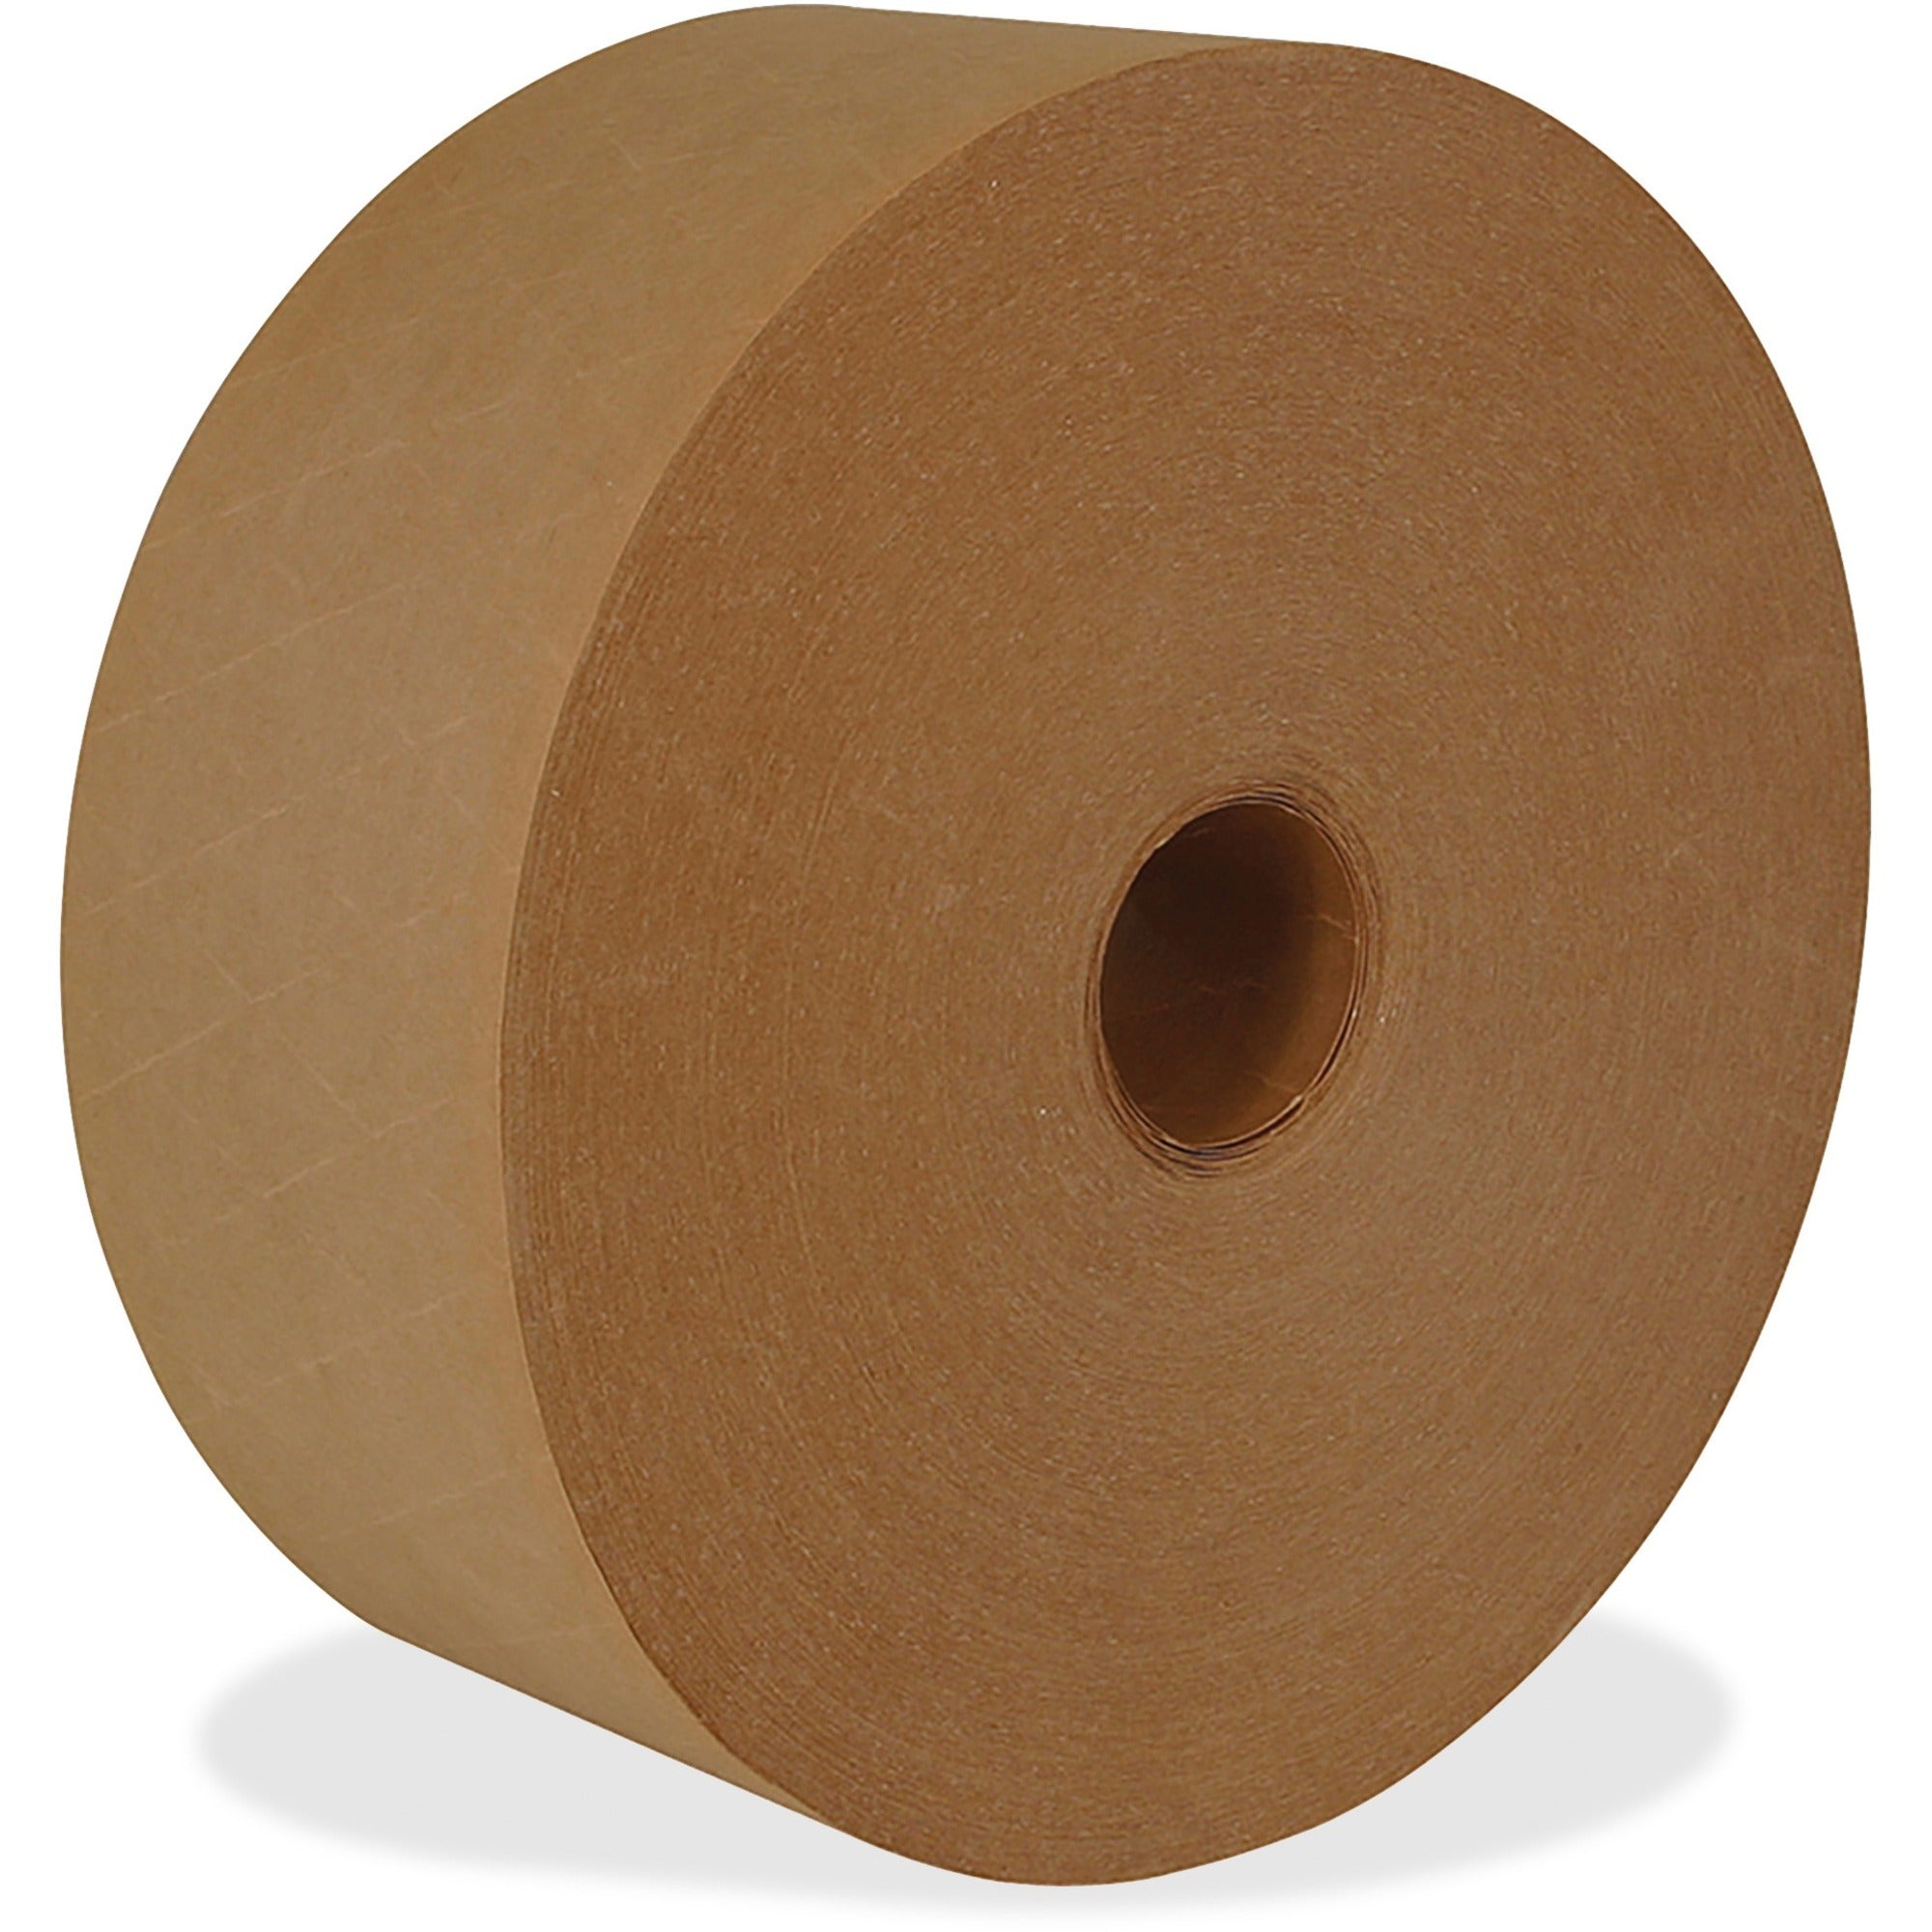 ipg Medium Duty Water-activated Tape - 150 yd Length x 2.83" Width - 6.3 mil Thickness - Weather Resistant - For Sealing, Packing - 10 / Carton - Natural - 